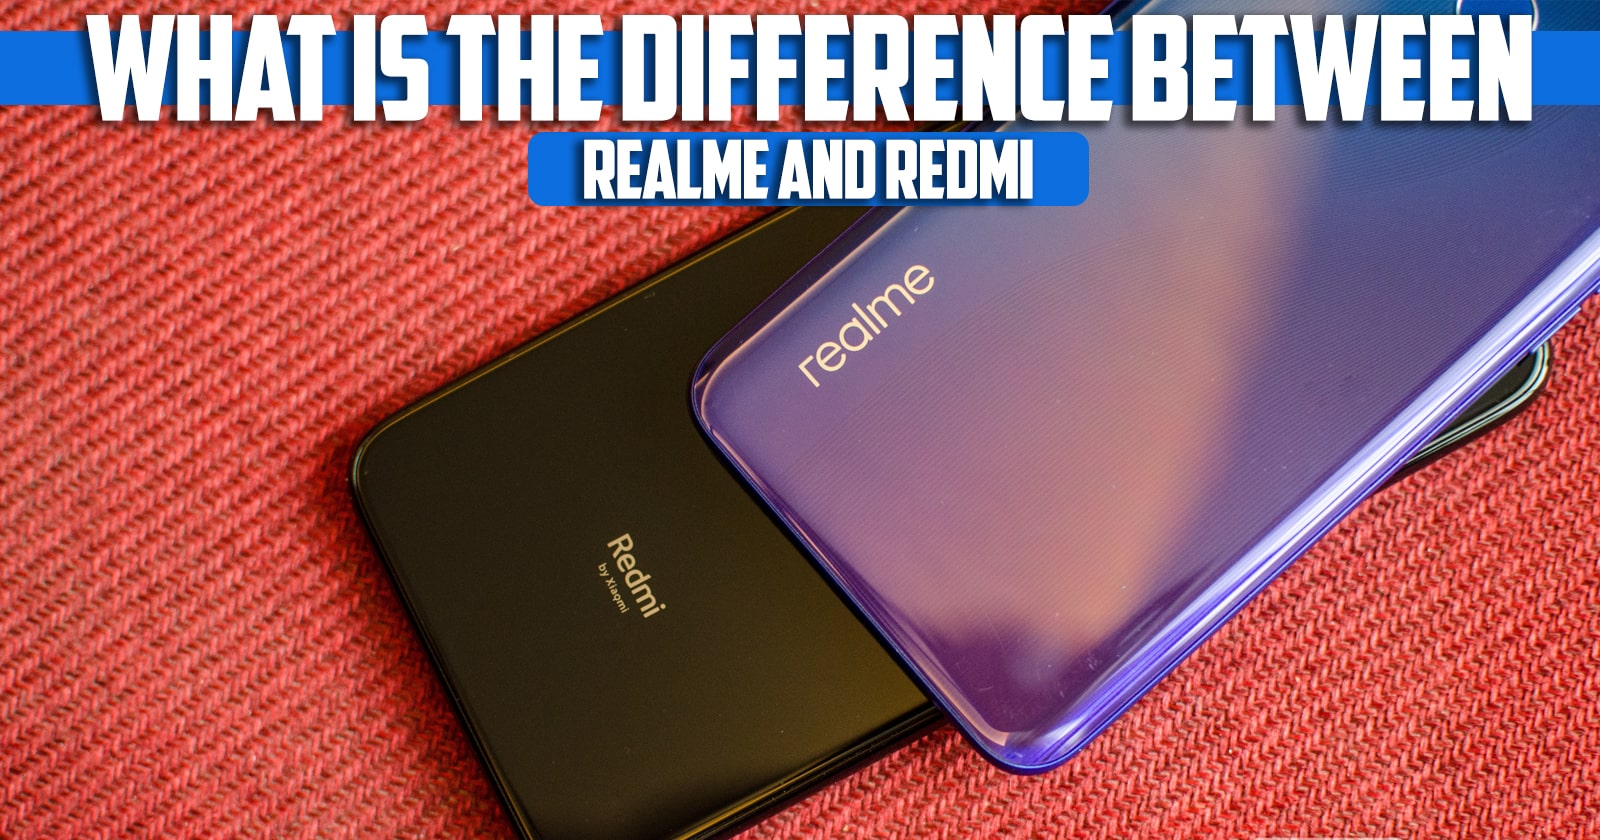 What is the difference between realme and Redmi?